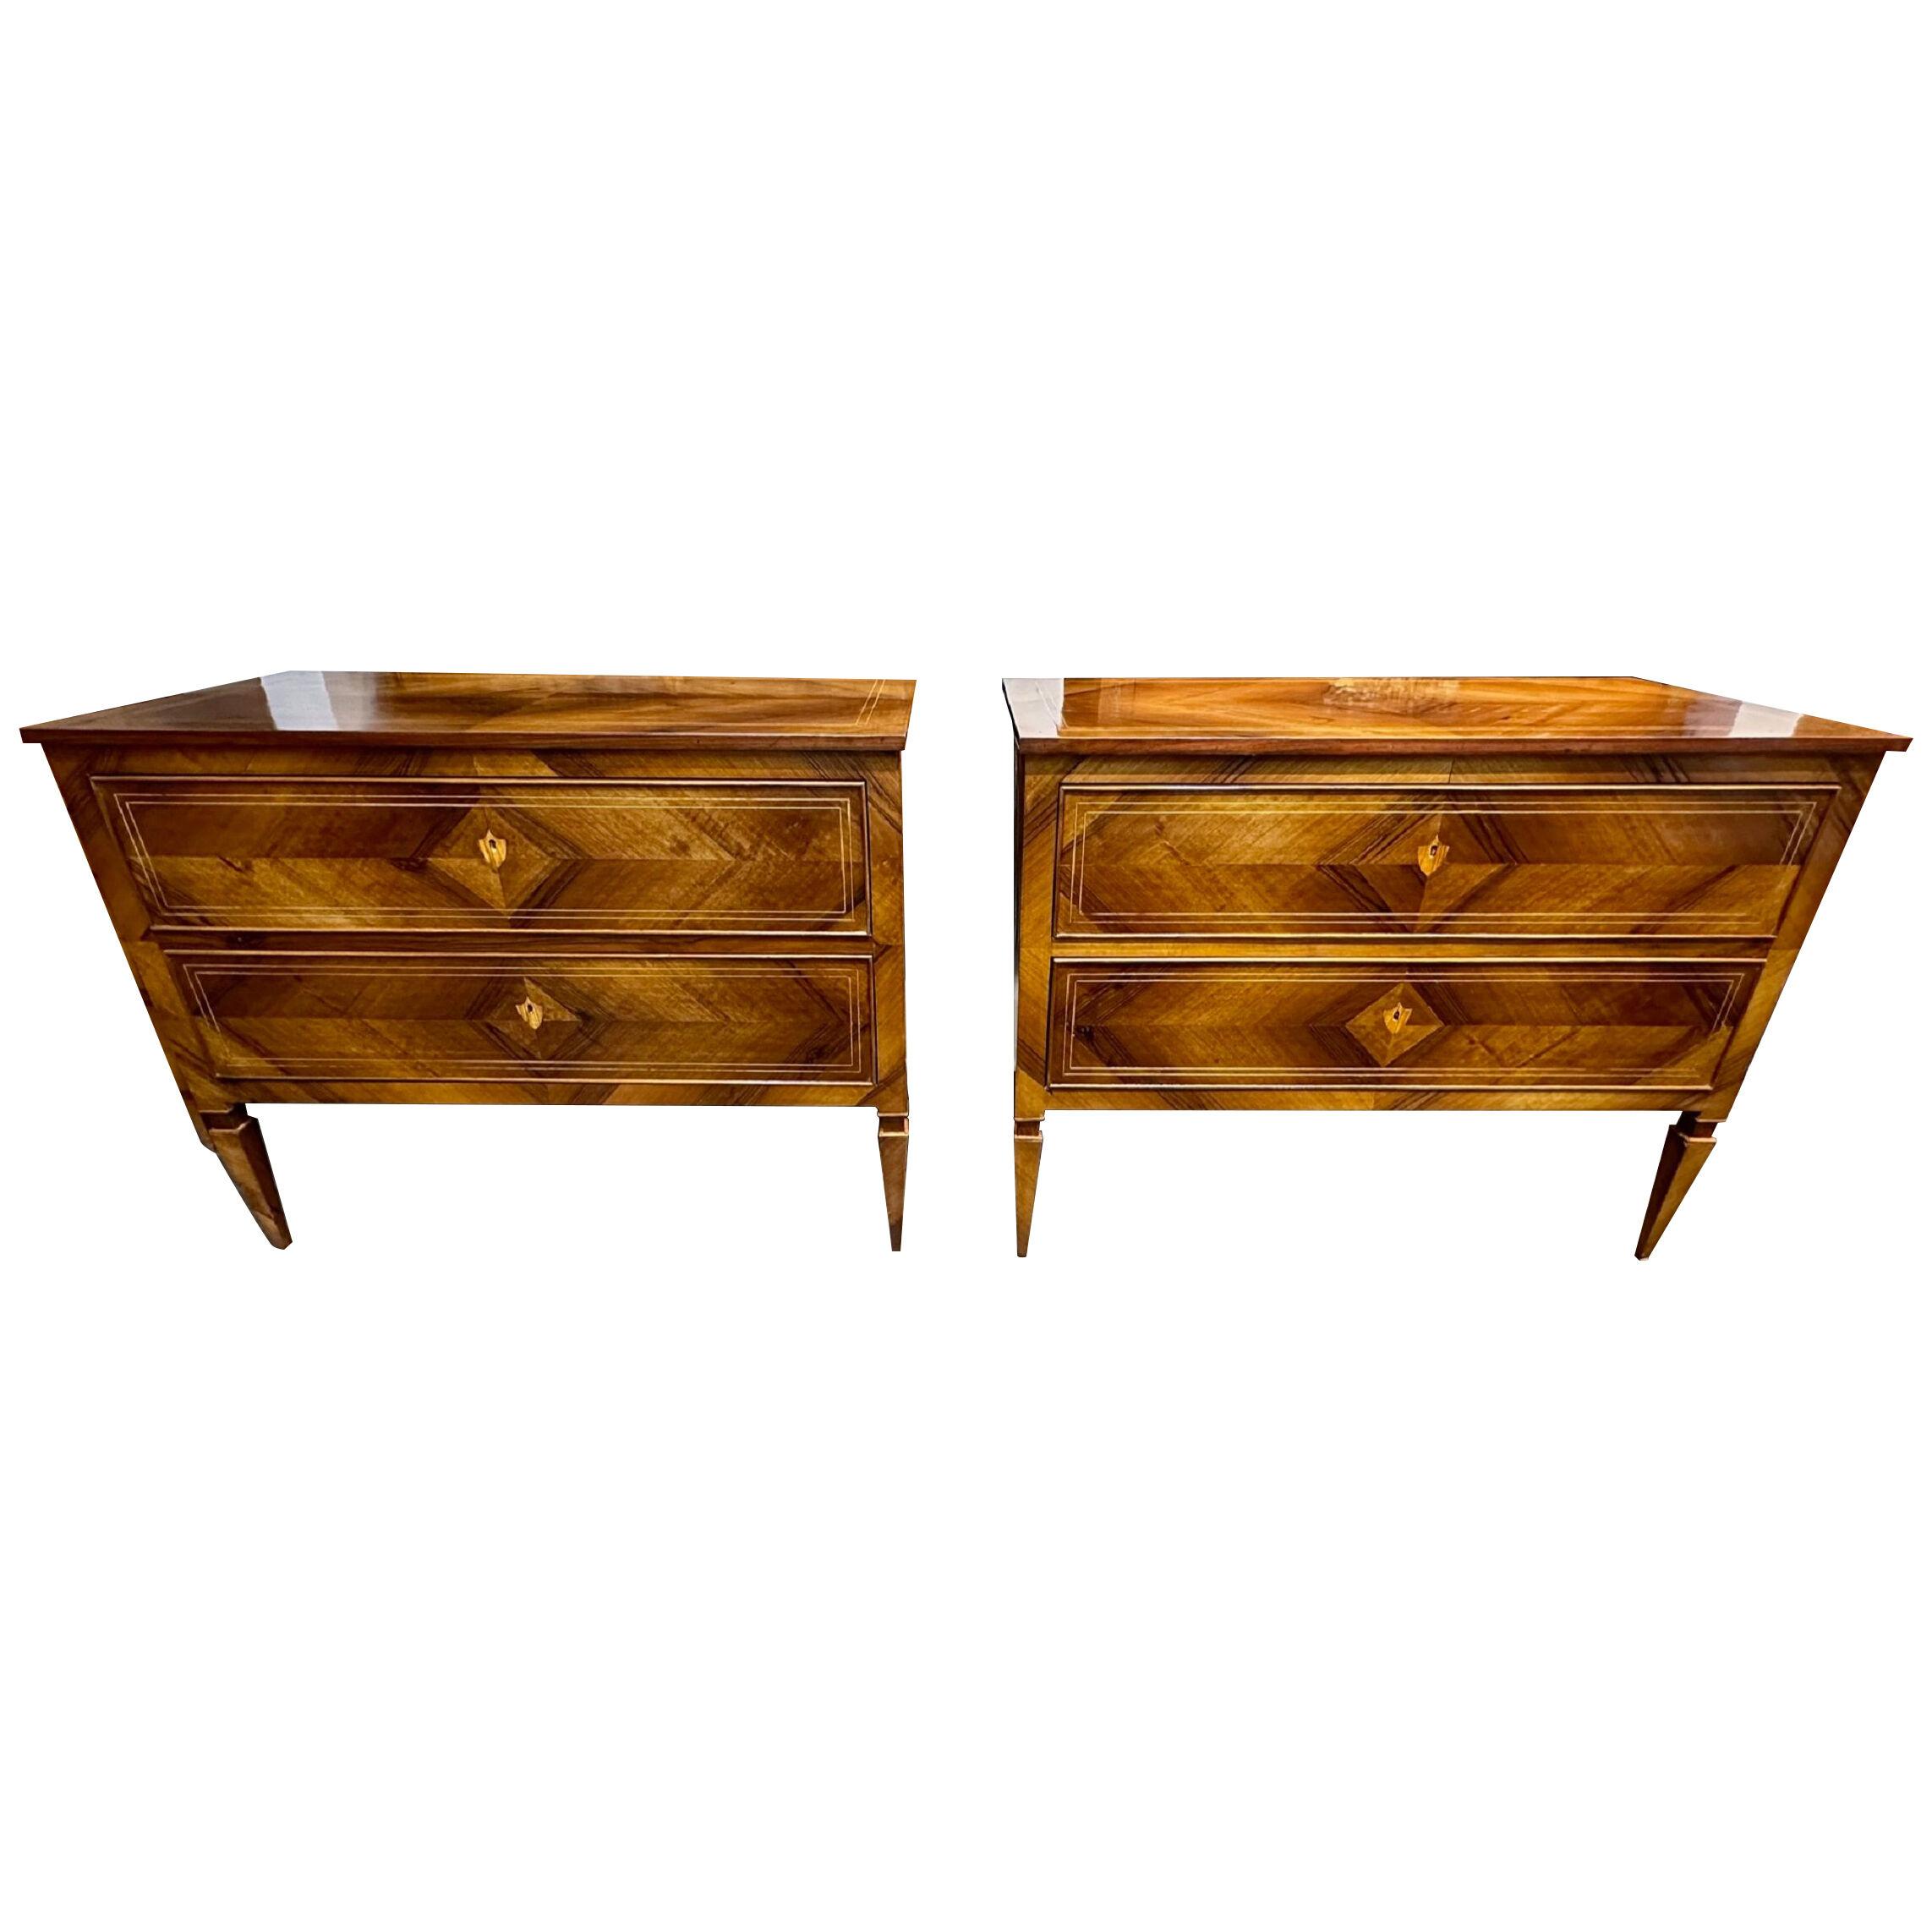 Pair of Neo-Classical Inlaid Walnut Commodes